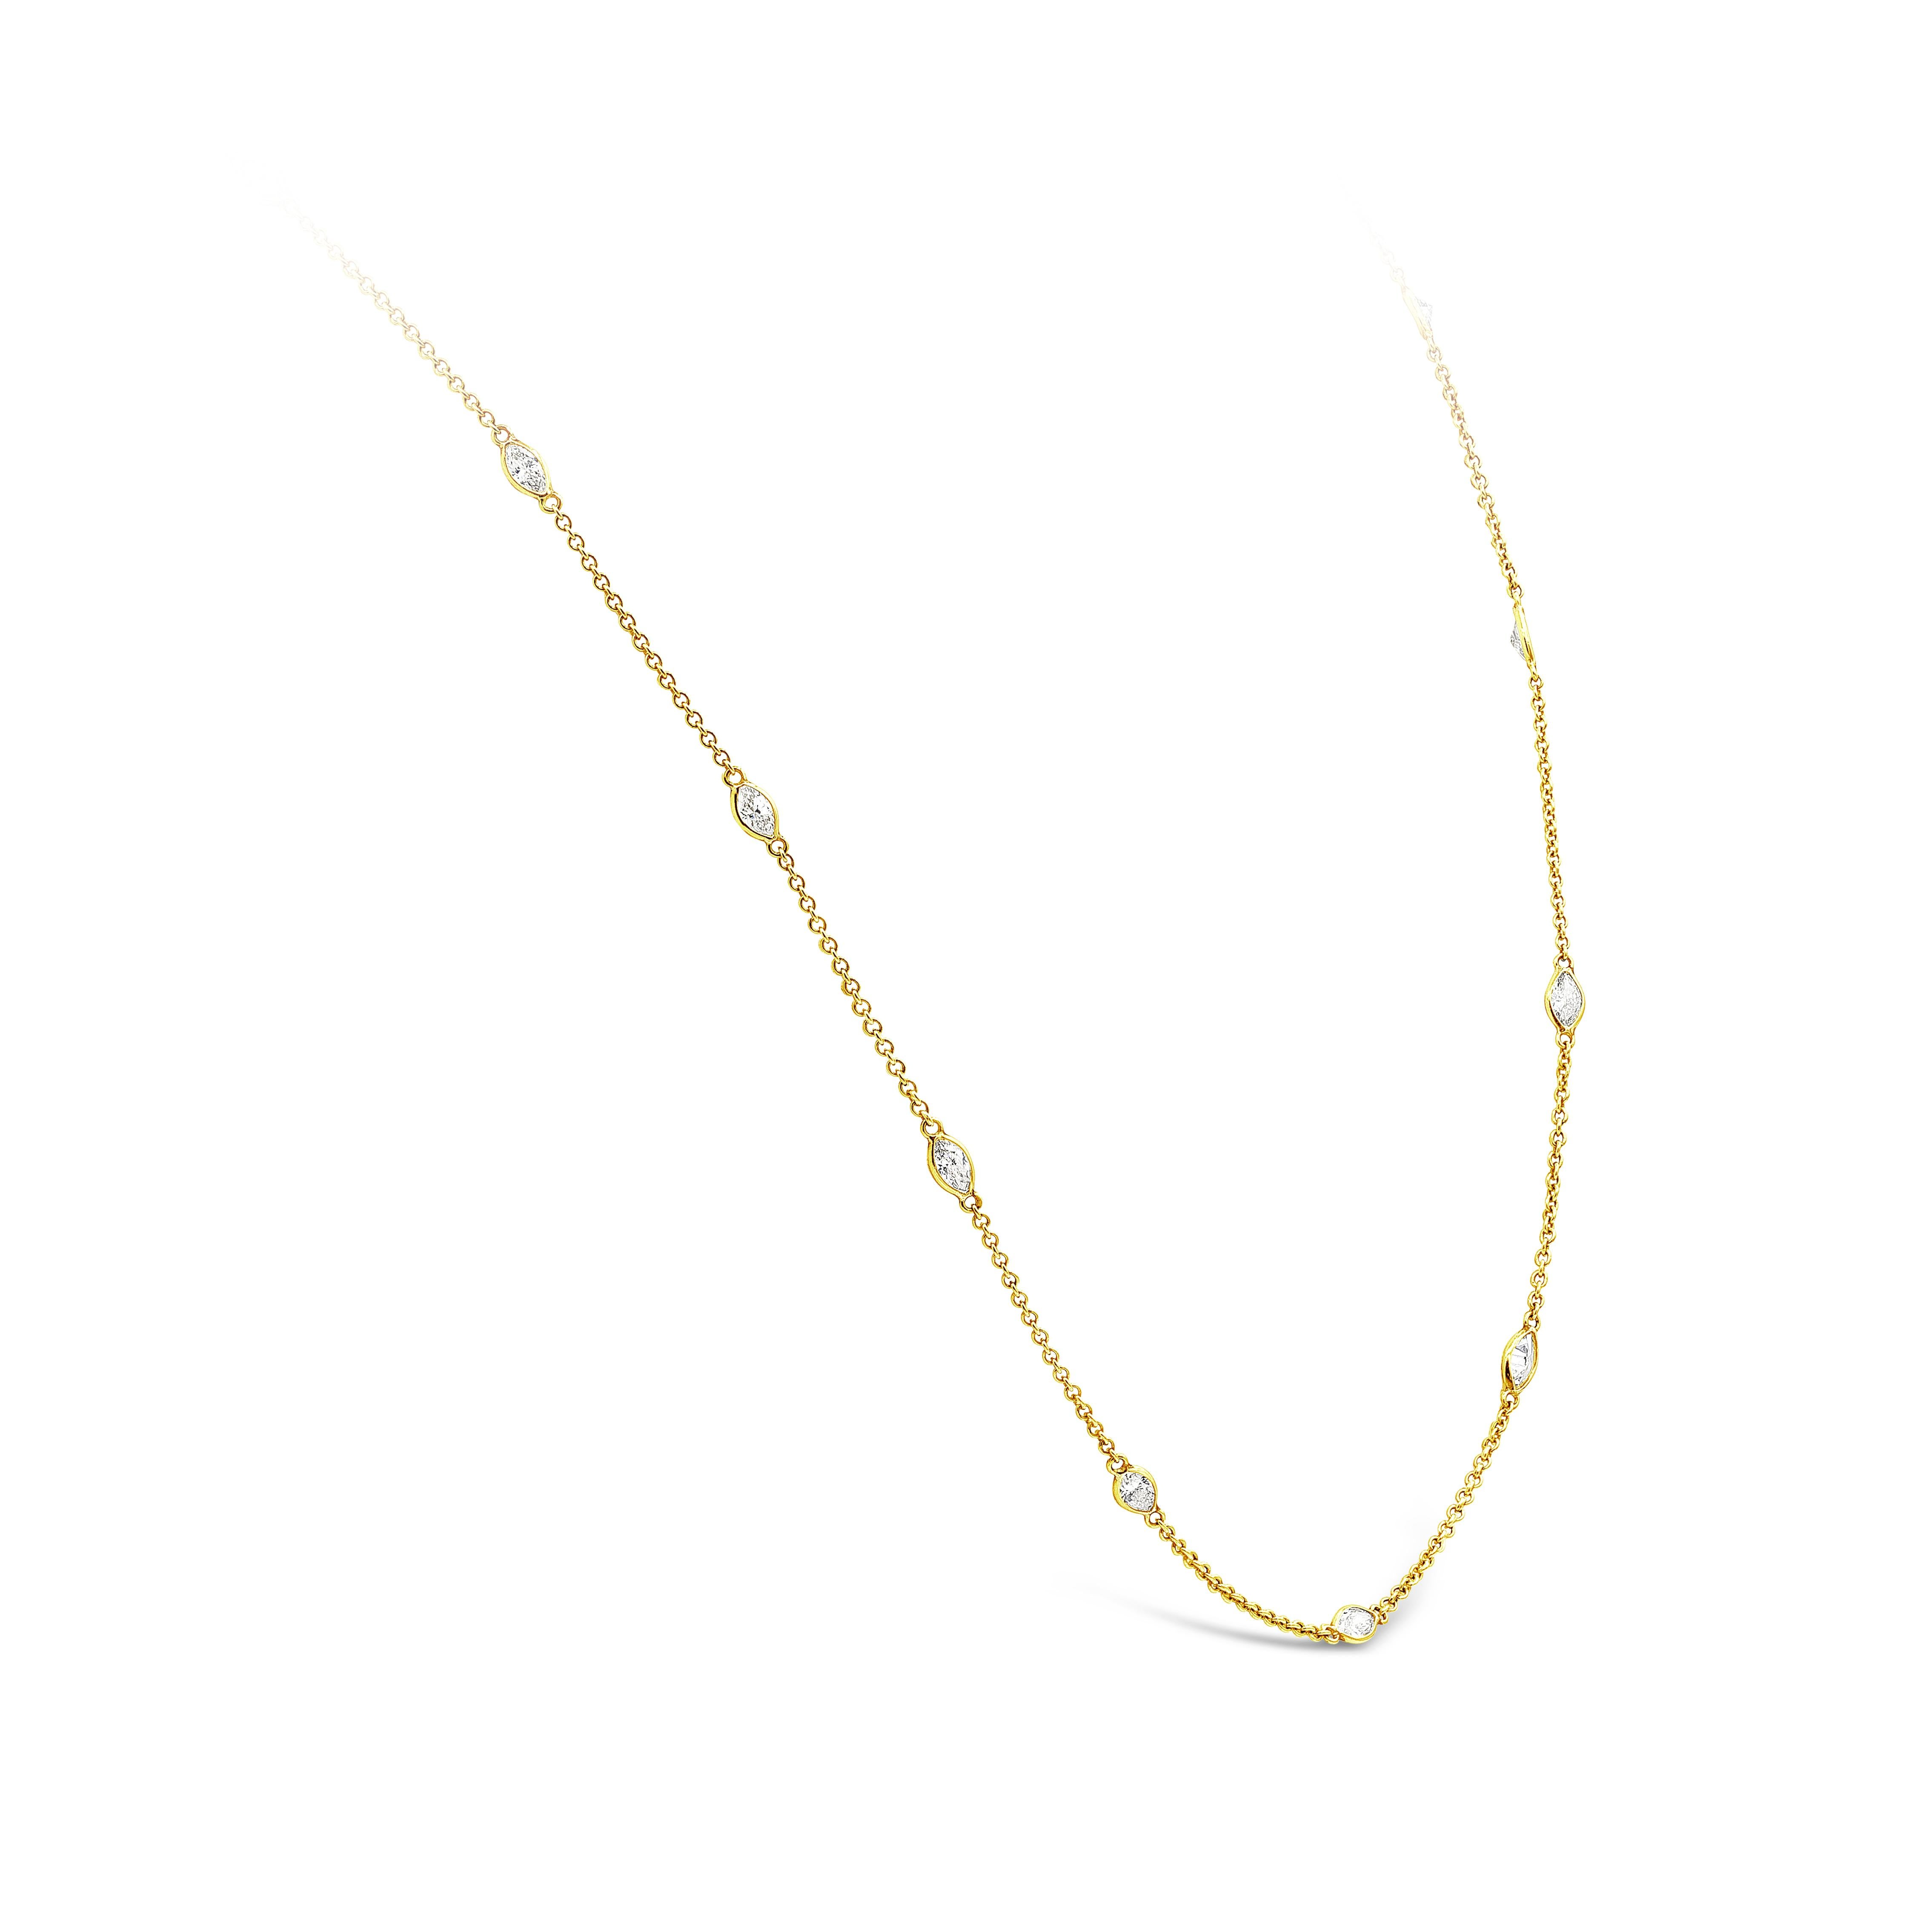 A simple yet classic necklace that packs a lot of sparkle; a line of marquis cut diamonds bezel set in 18k yellow gold are perfectly spaced for that delicate and feminine look and finish. 22 pieces of diamonds weigh 4.20 carats total. Approximately